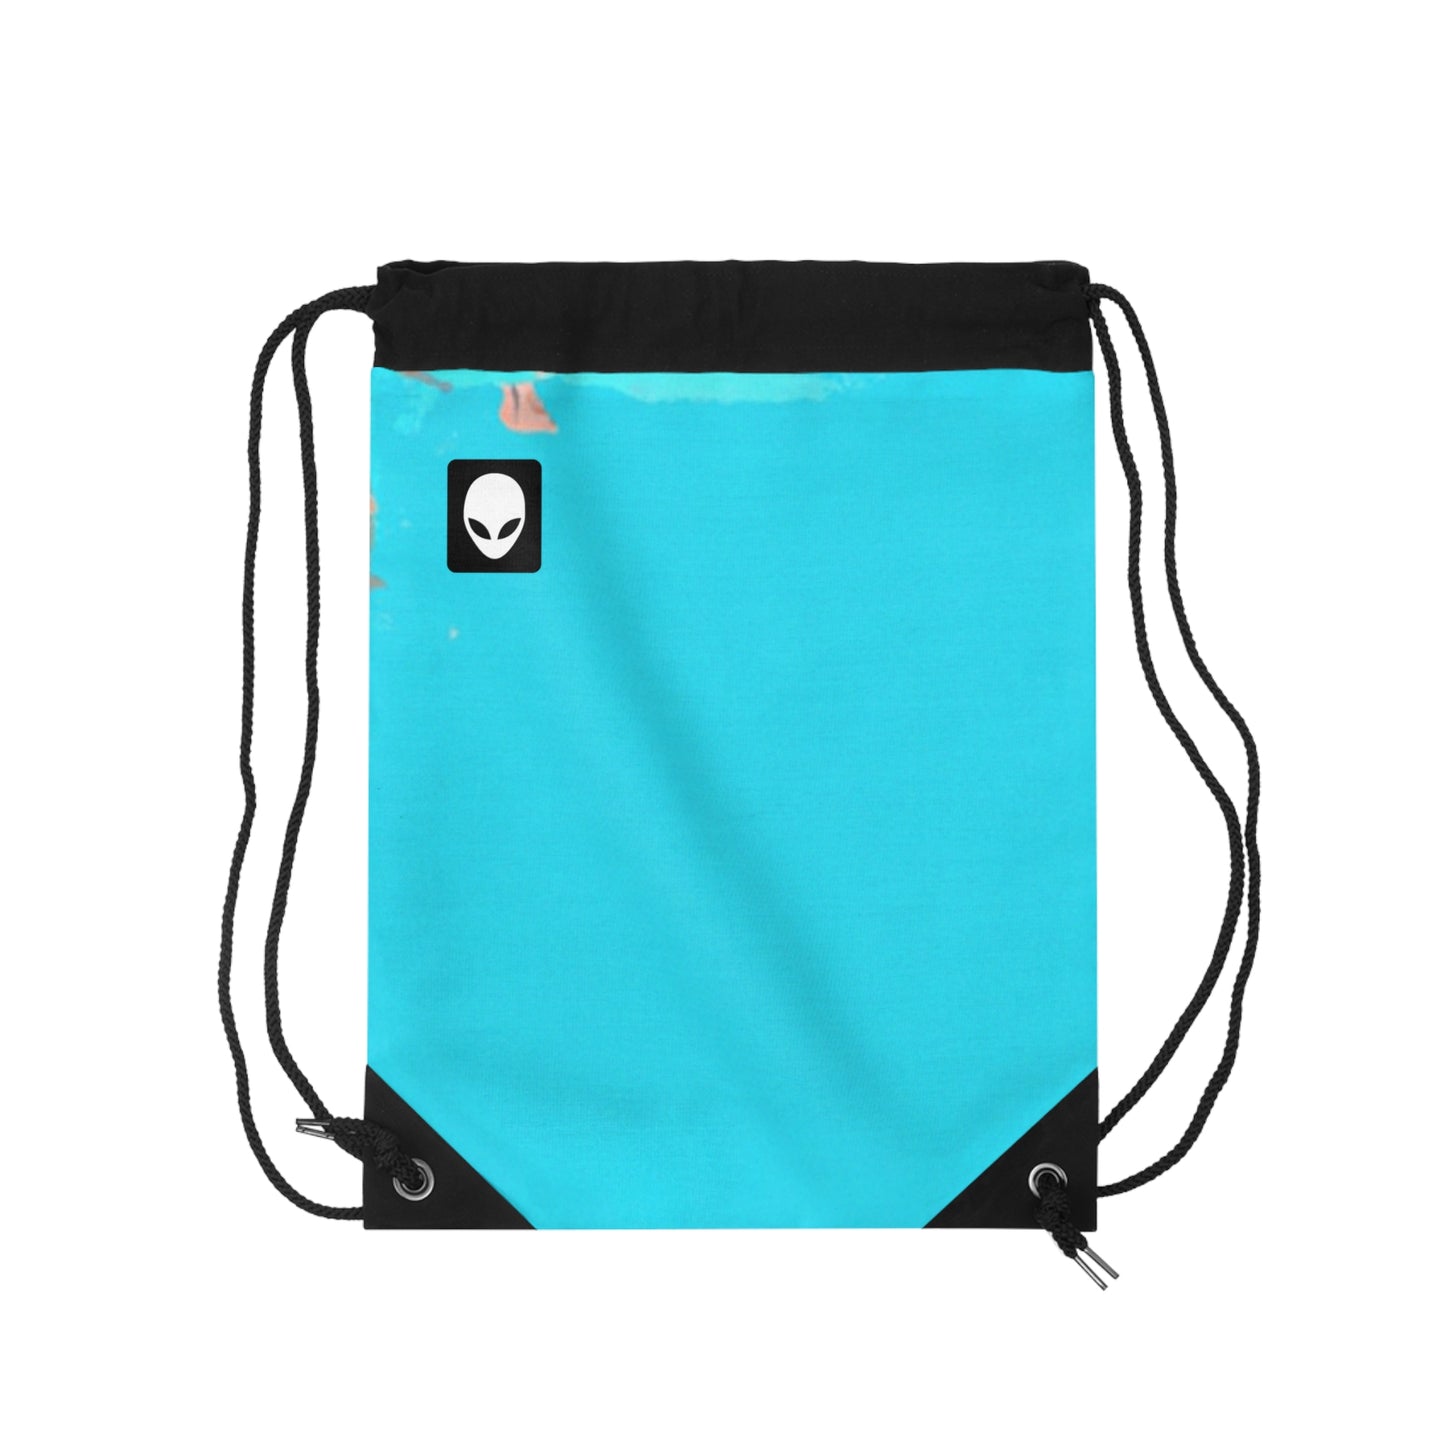 "A Breezy Skyscape: A Combination of Tradition and Modernity"- The Alien Drawstring Bag